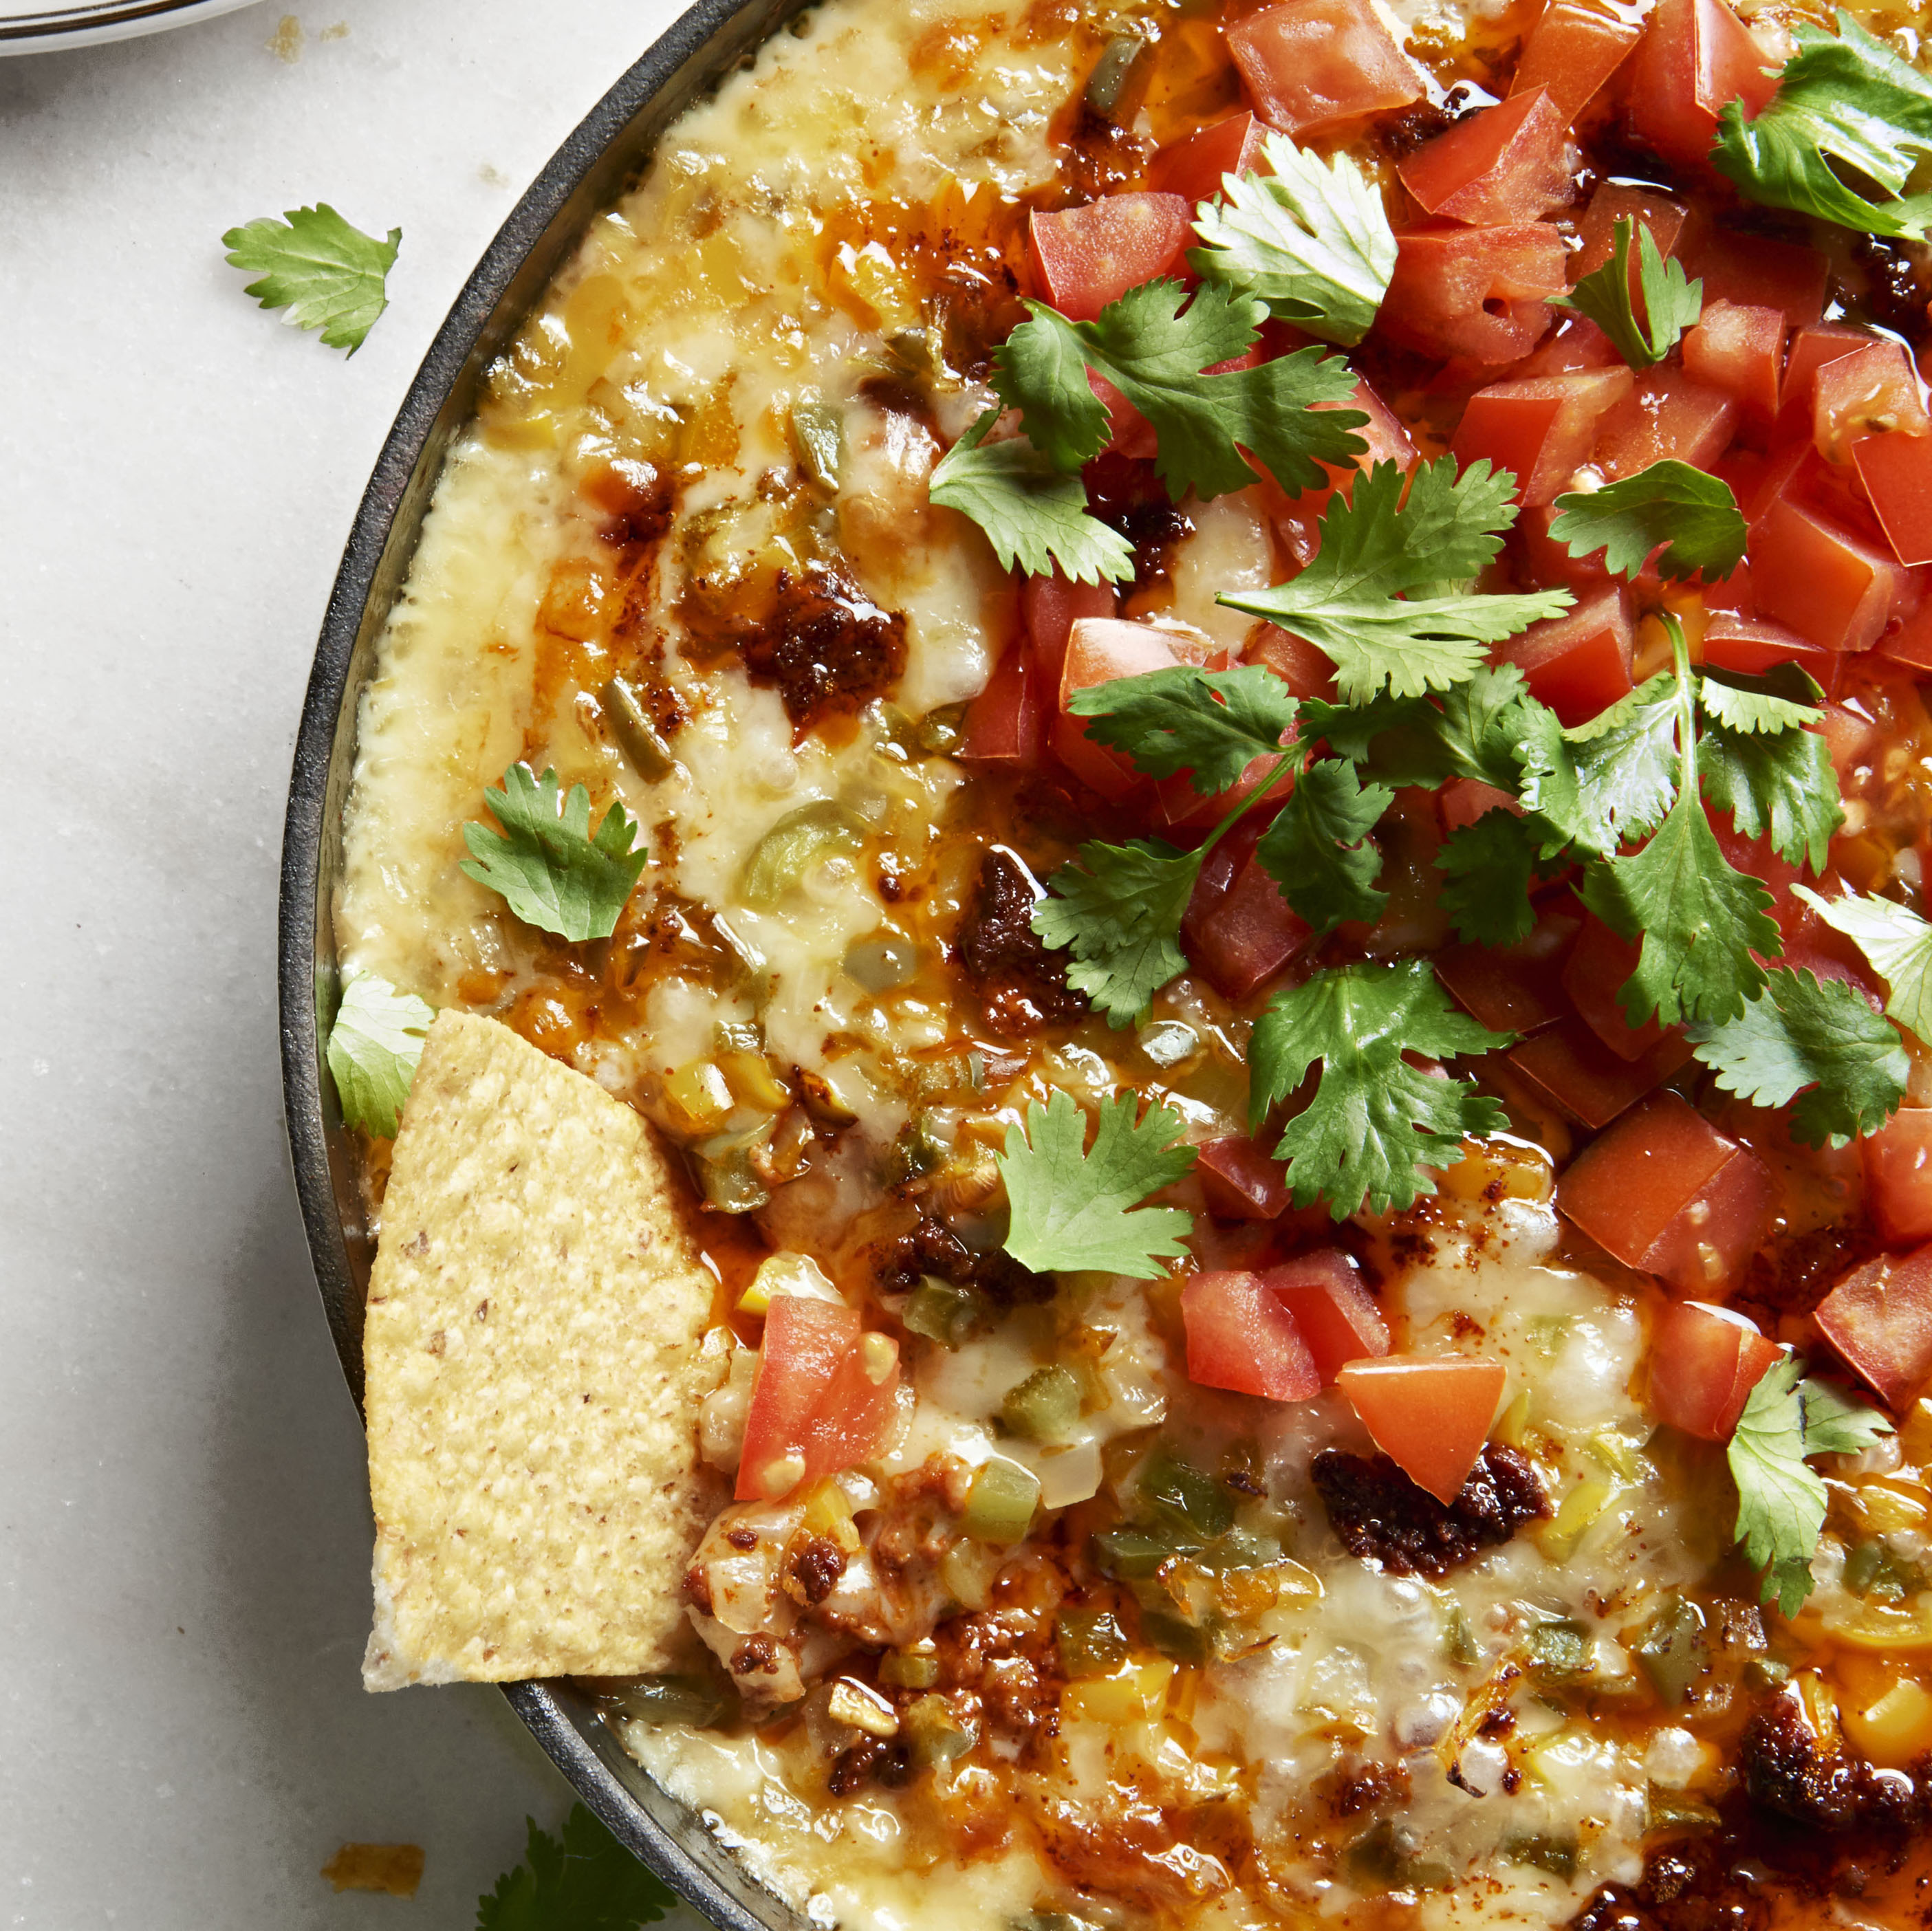 Ree Drummond's Queso Fundido 